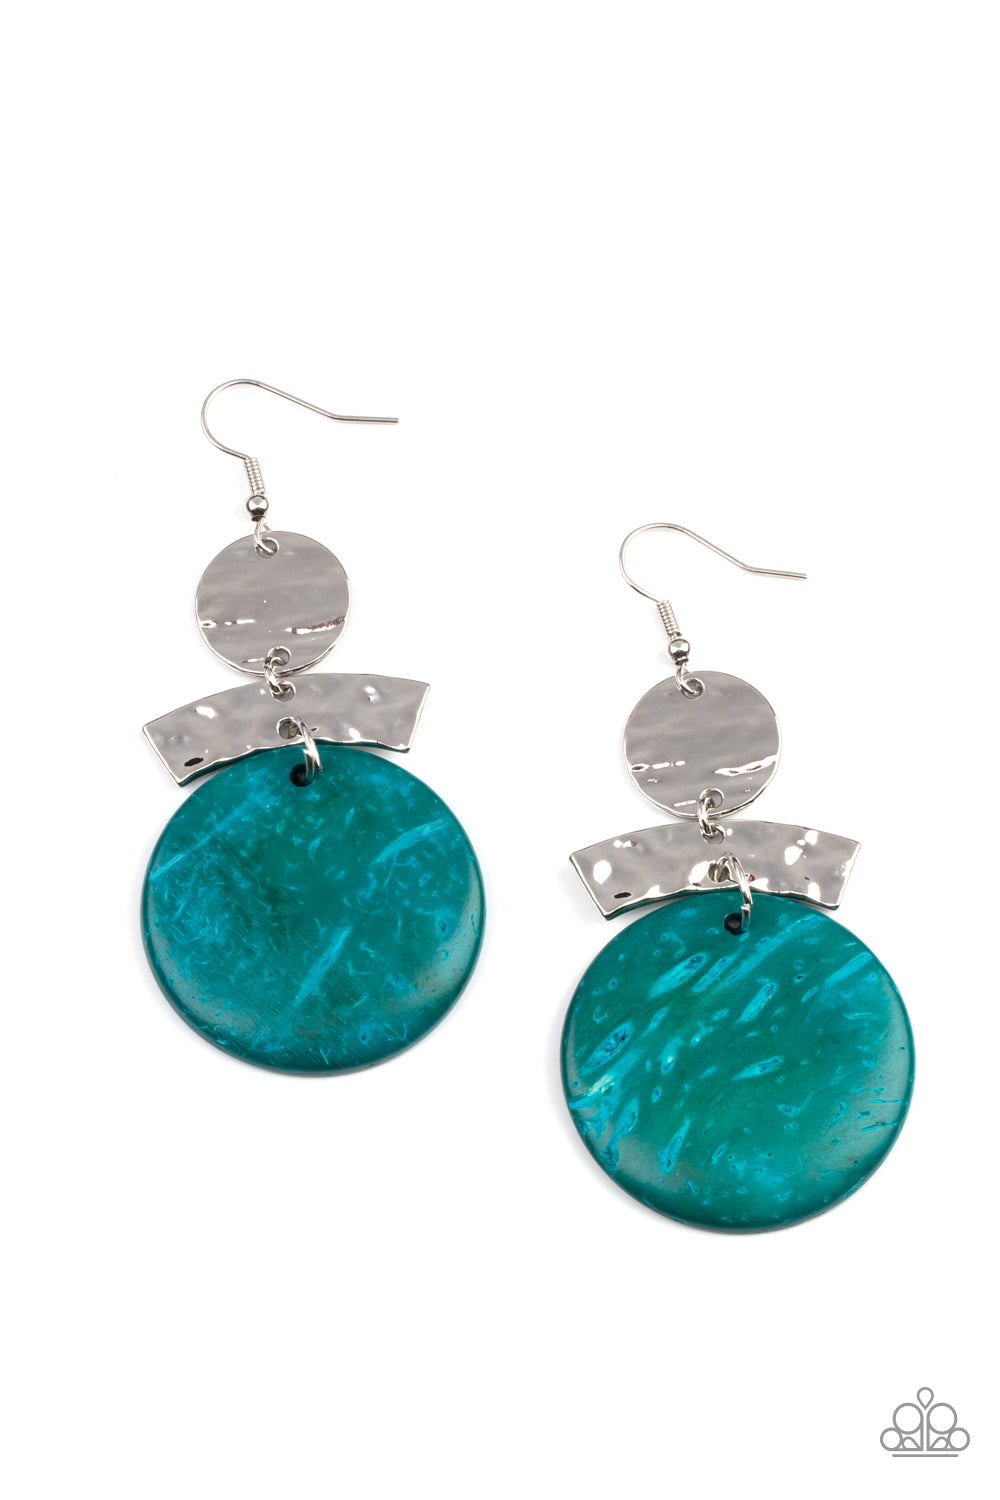 Paparazzi Diva Of My Domain - Blue Earrings - A Finishing Touch Jewelry